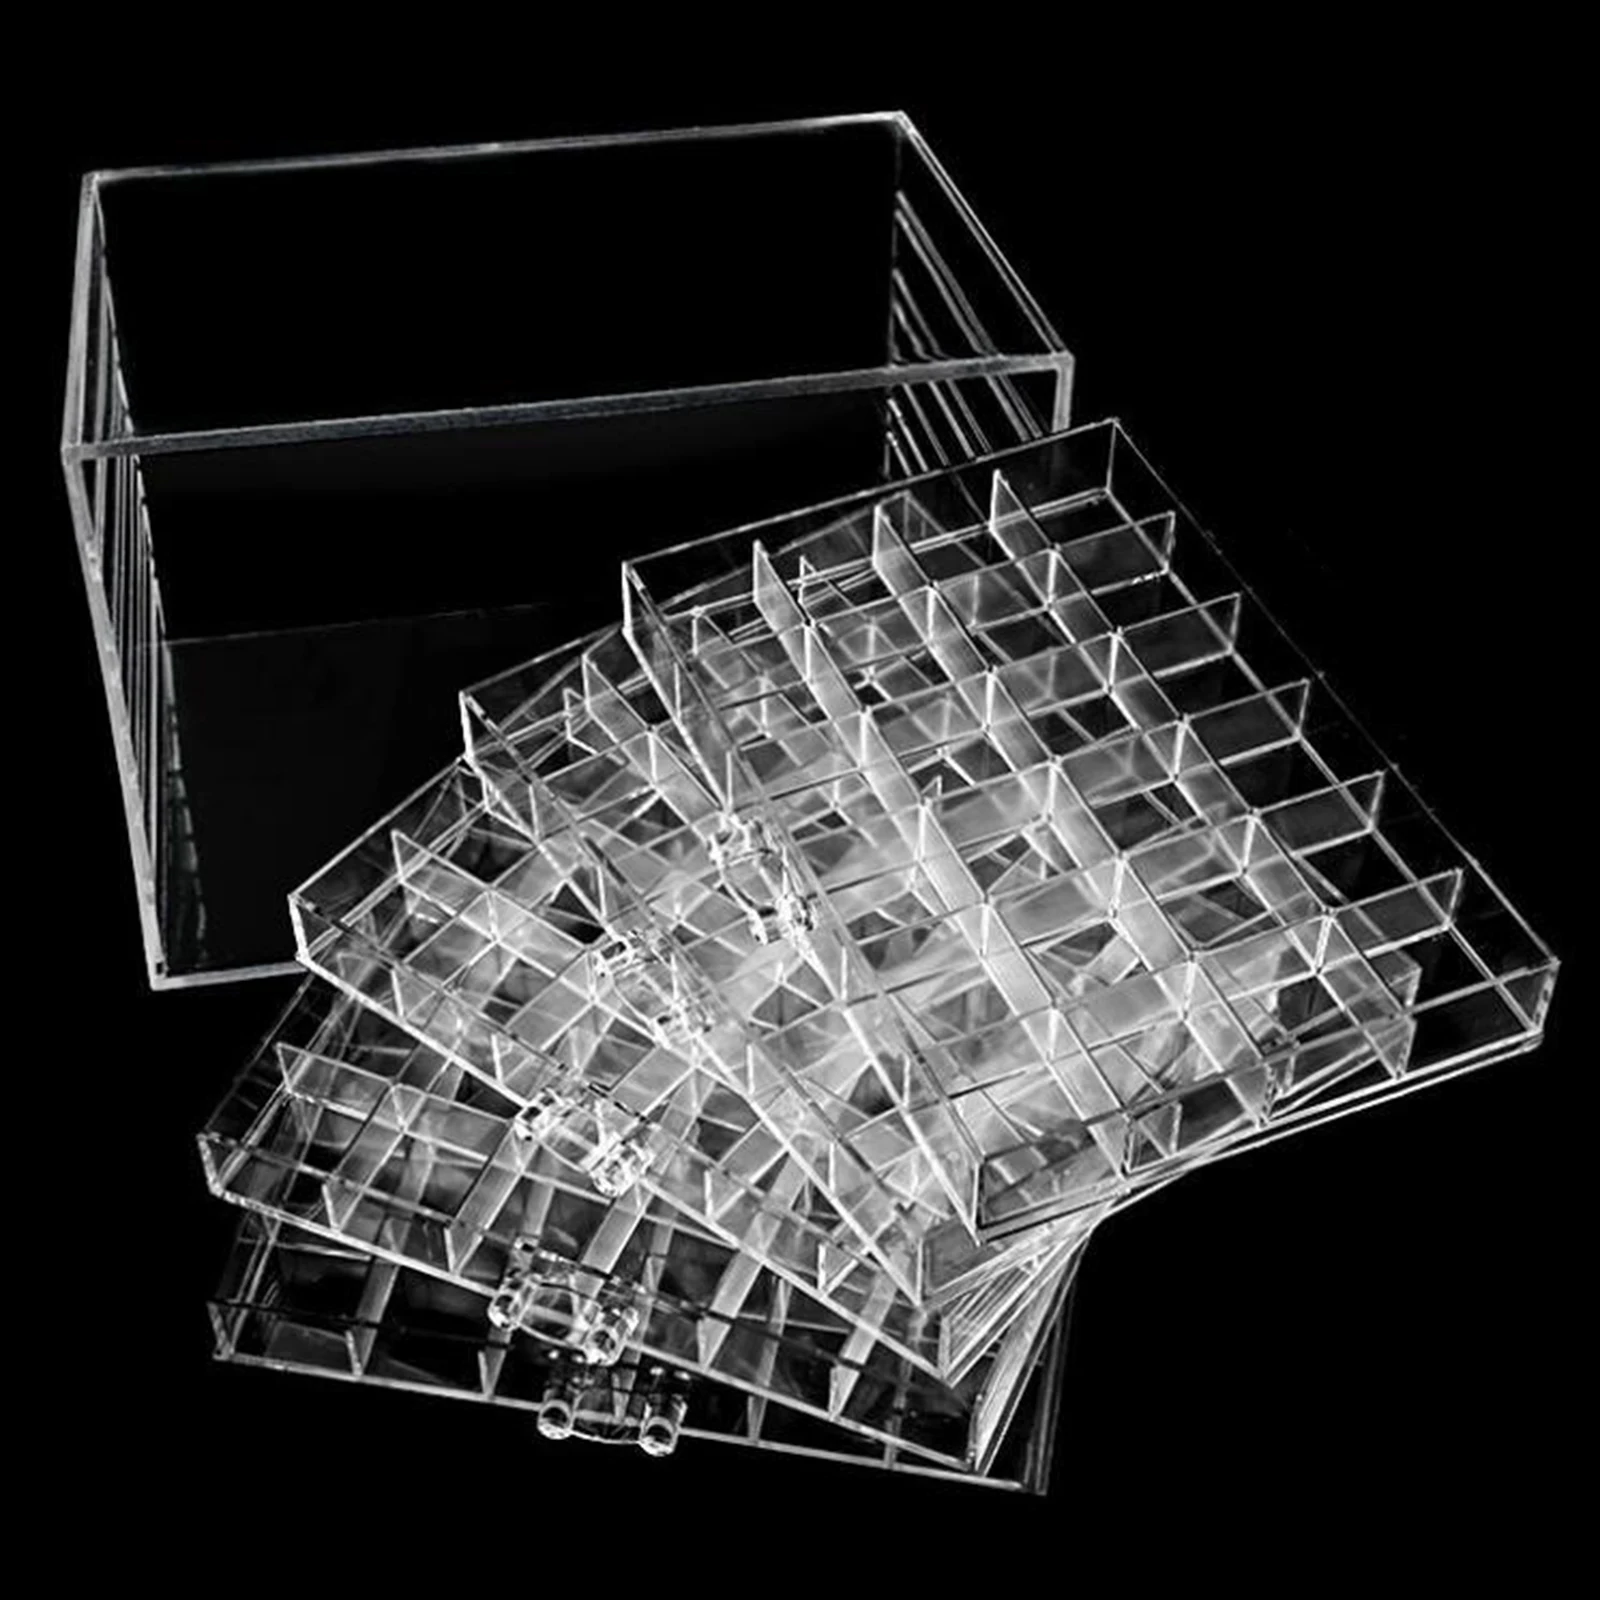 Acrylic 120-Slot Nail Art Accessories Tools Storage Container Case DIY Craft Jewelry Bead Paintings Container Organizer 